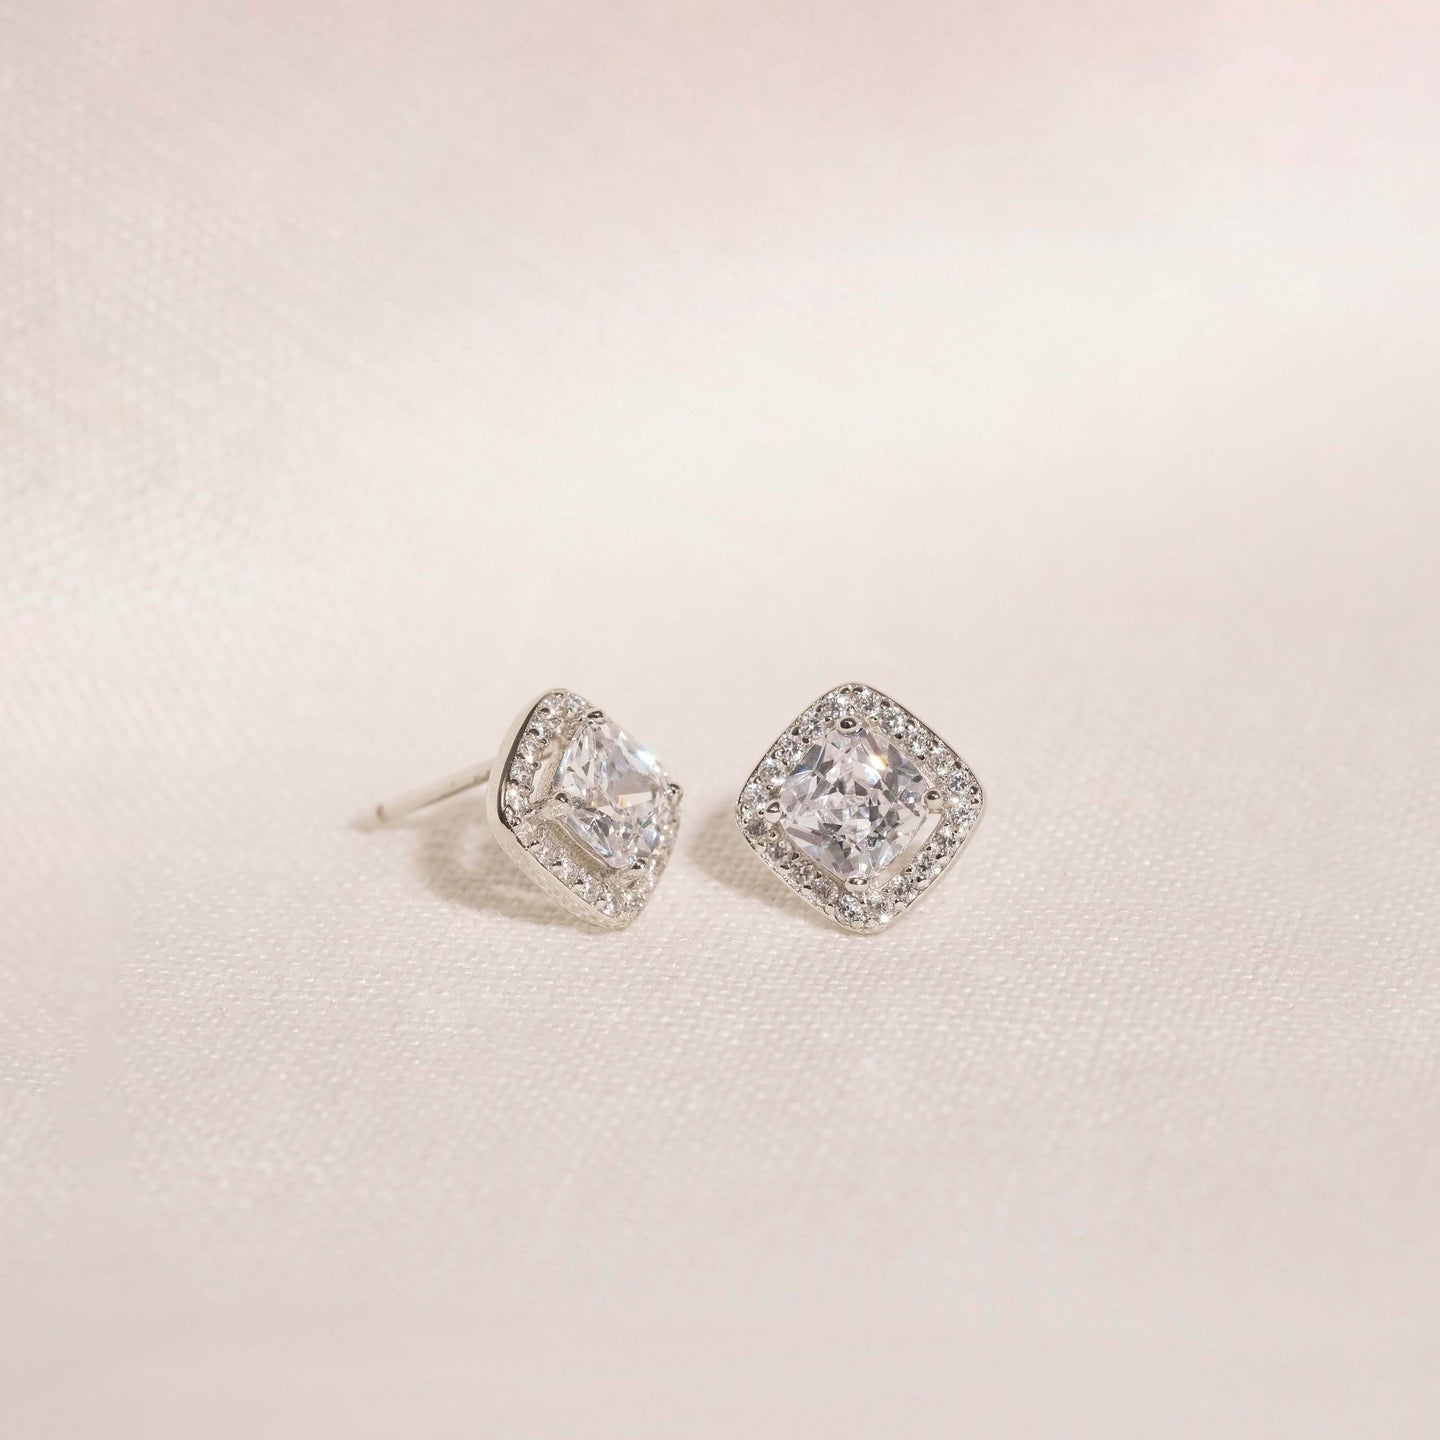 products/vicky-cz-stud-earrings-925-sterling-silver-1.jpg